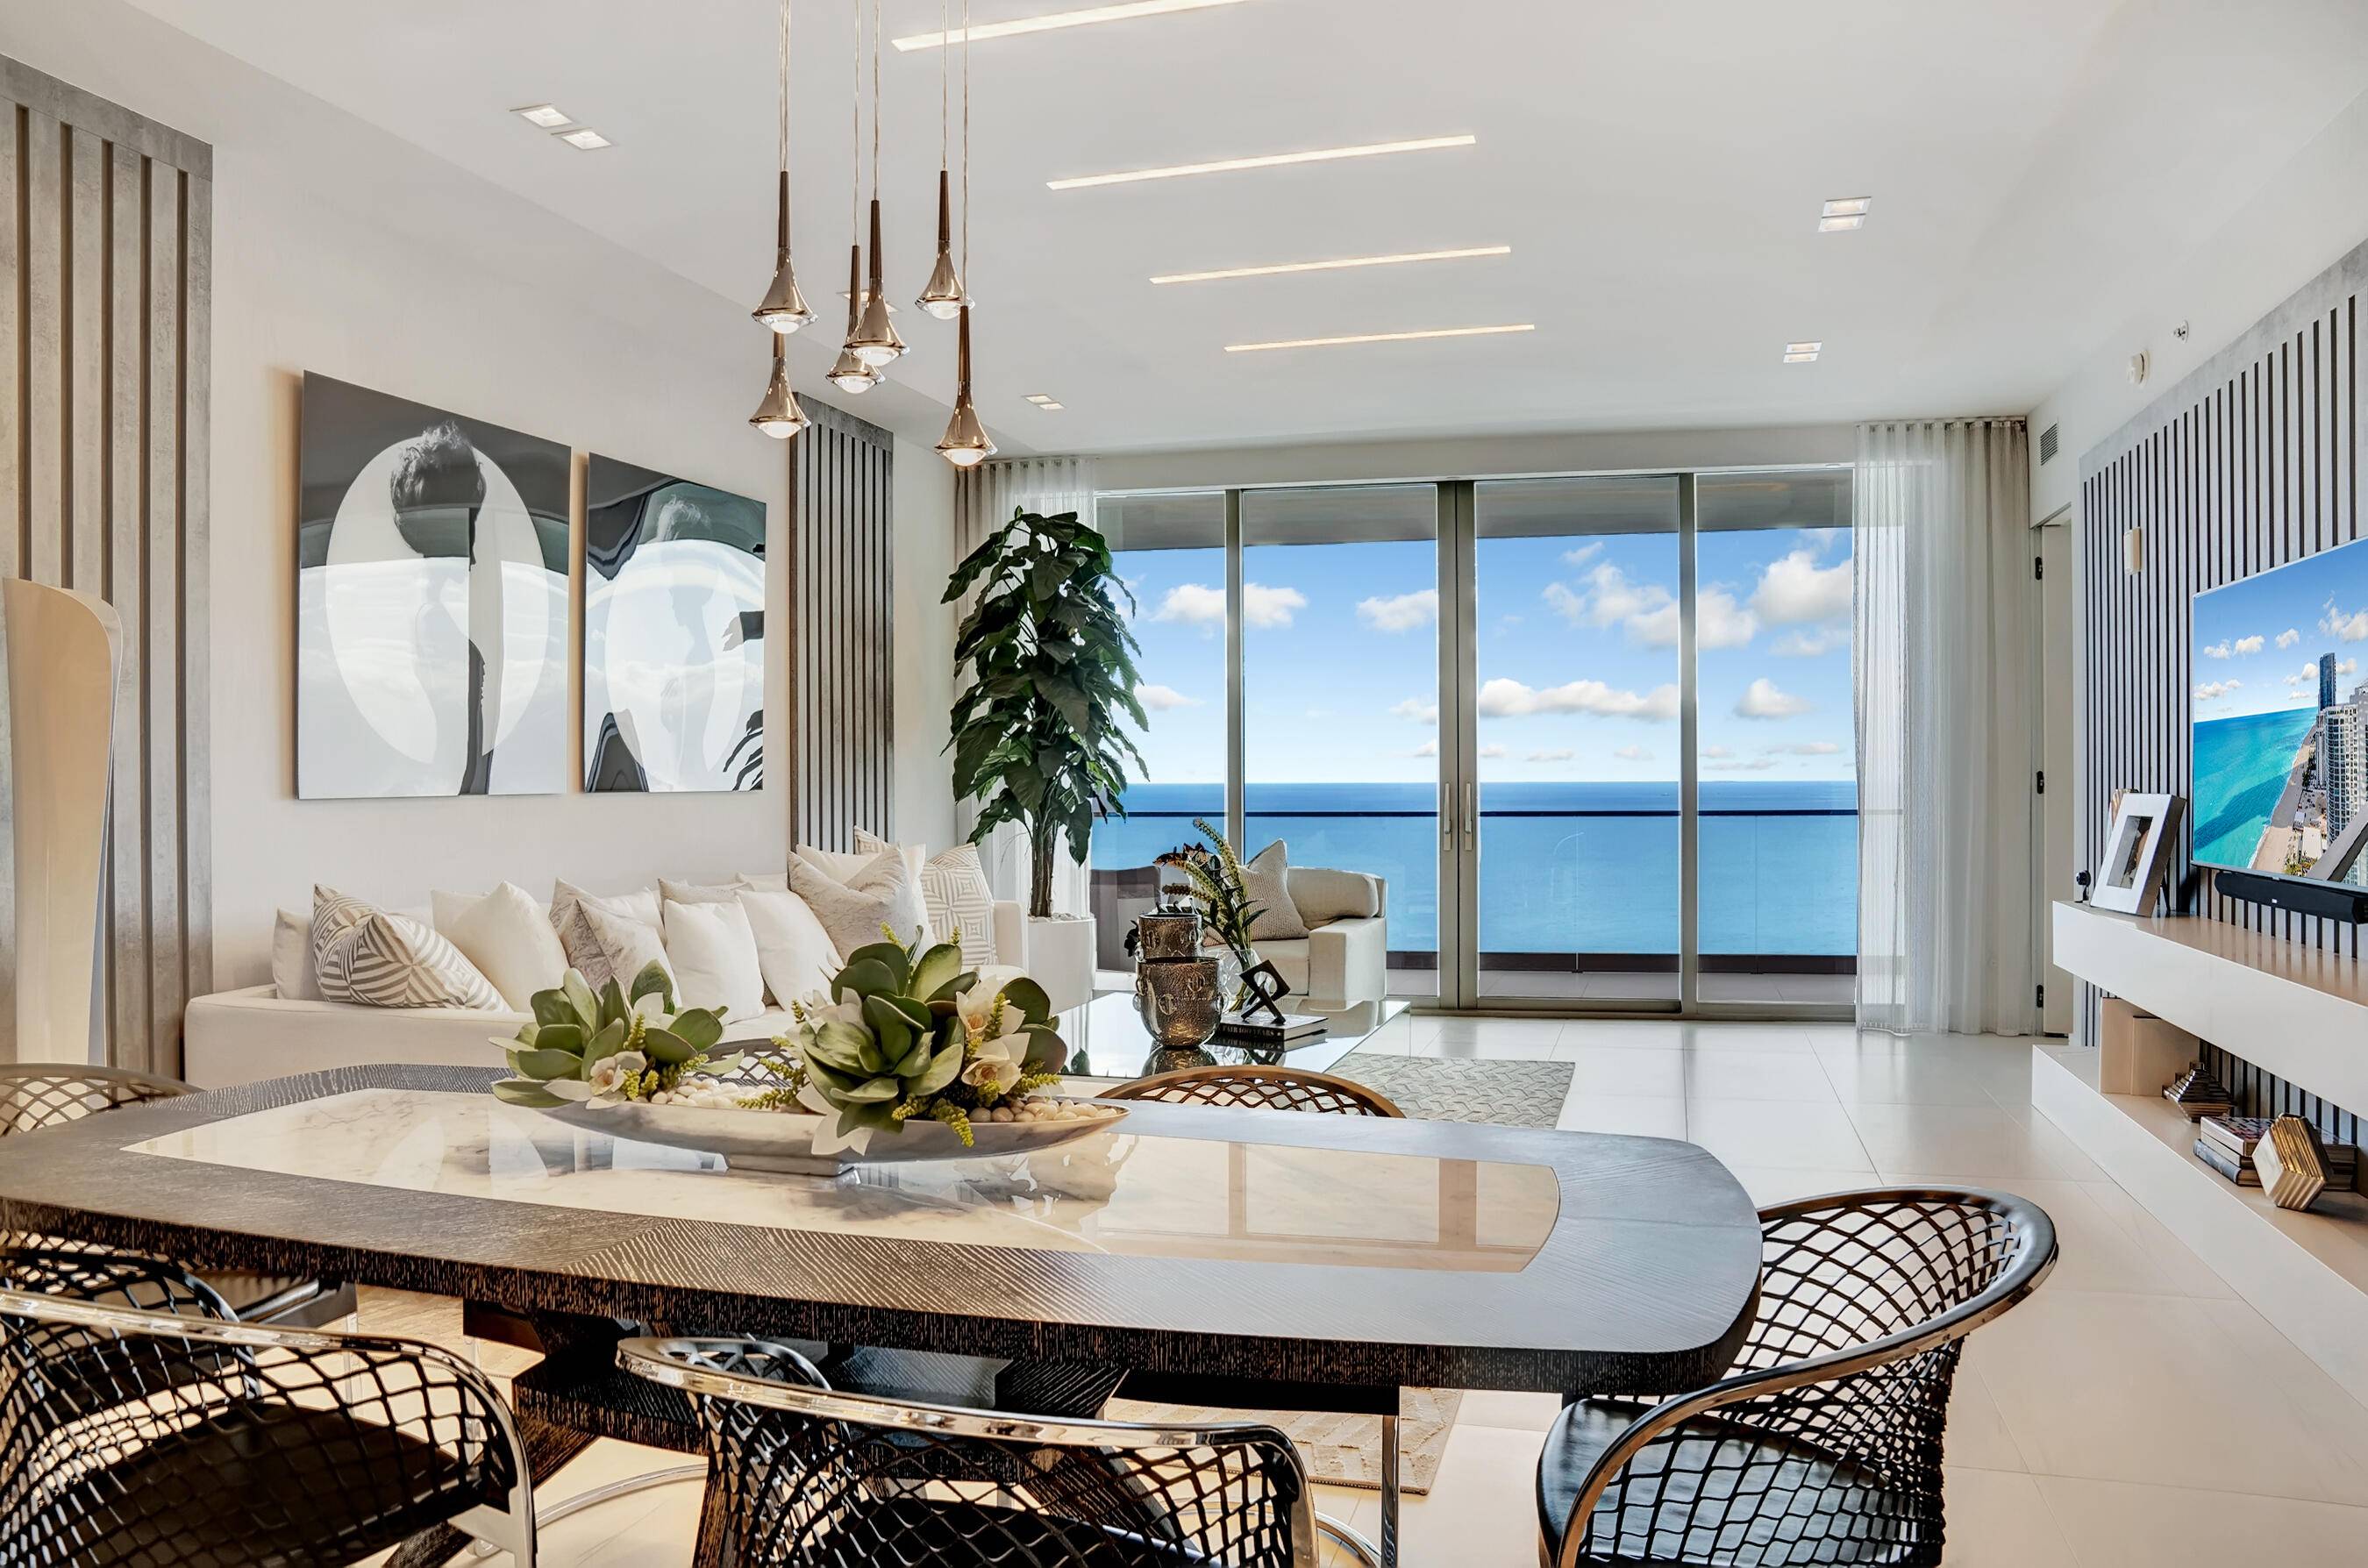 Armani Casa is an unparalleled experience cultivated by renowned designer Giorgio Armani and famous architect, Cesar Pelli, situated in the heart of Sunny Isles.